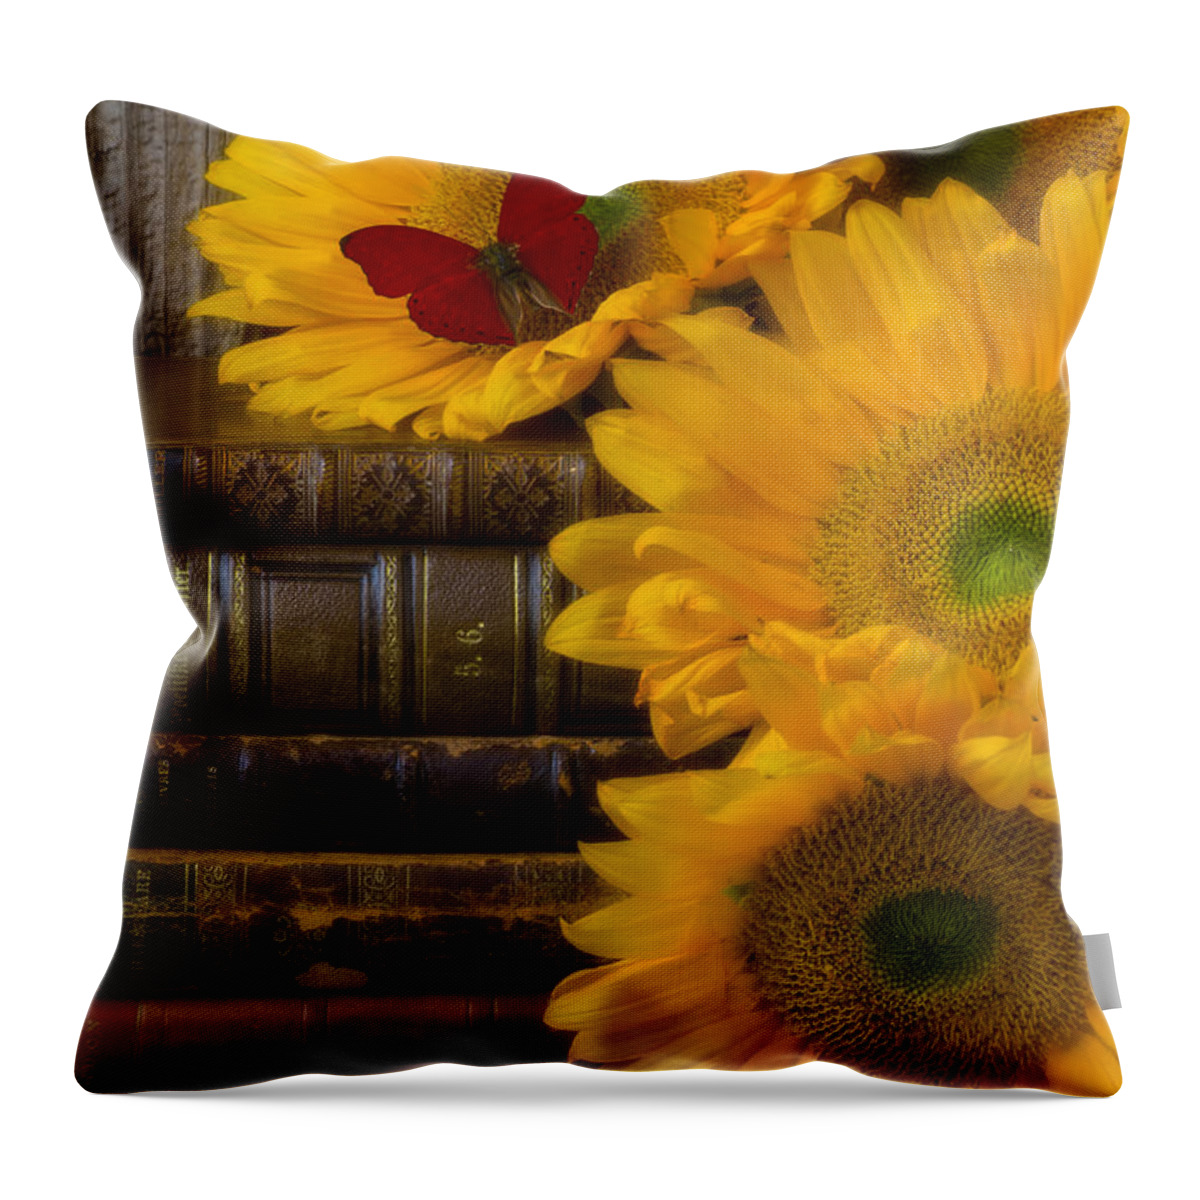 Sunflowers Throw Pillow featuring the photograph Sunflowers and old books by Garry Gay